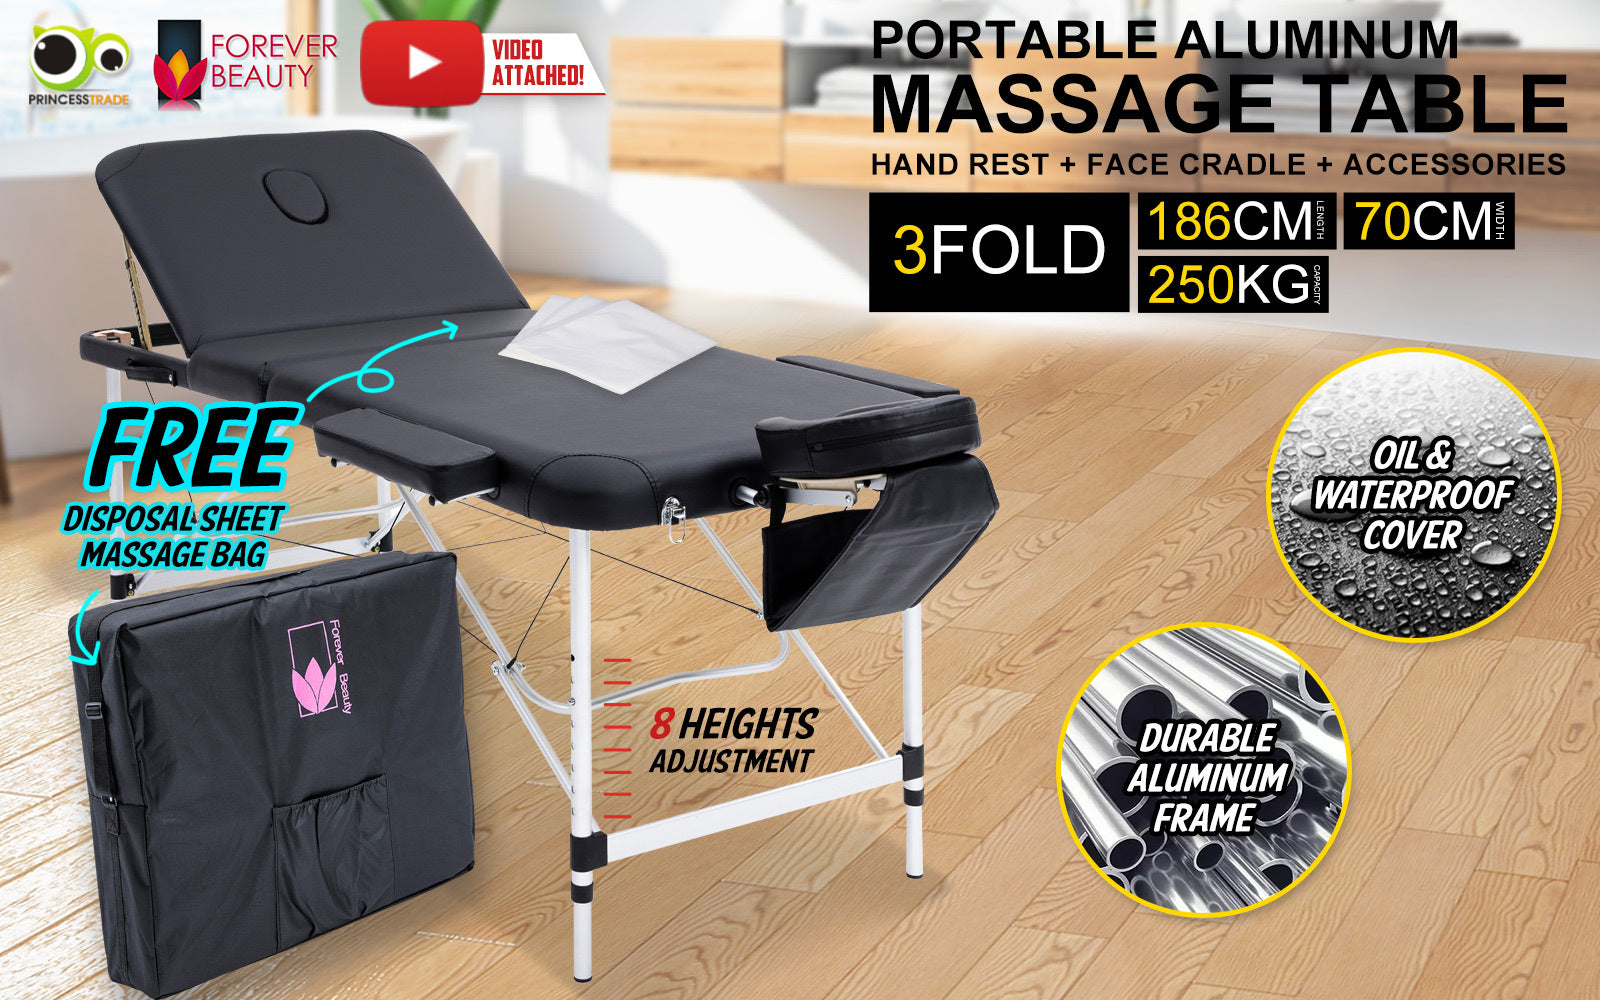 Black Portable Beauty Massage Table Bed Therapy Waxing 3 Fold 70cm Aluminium - image2